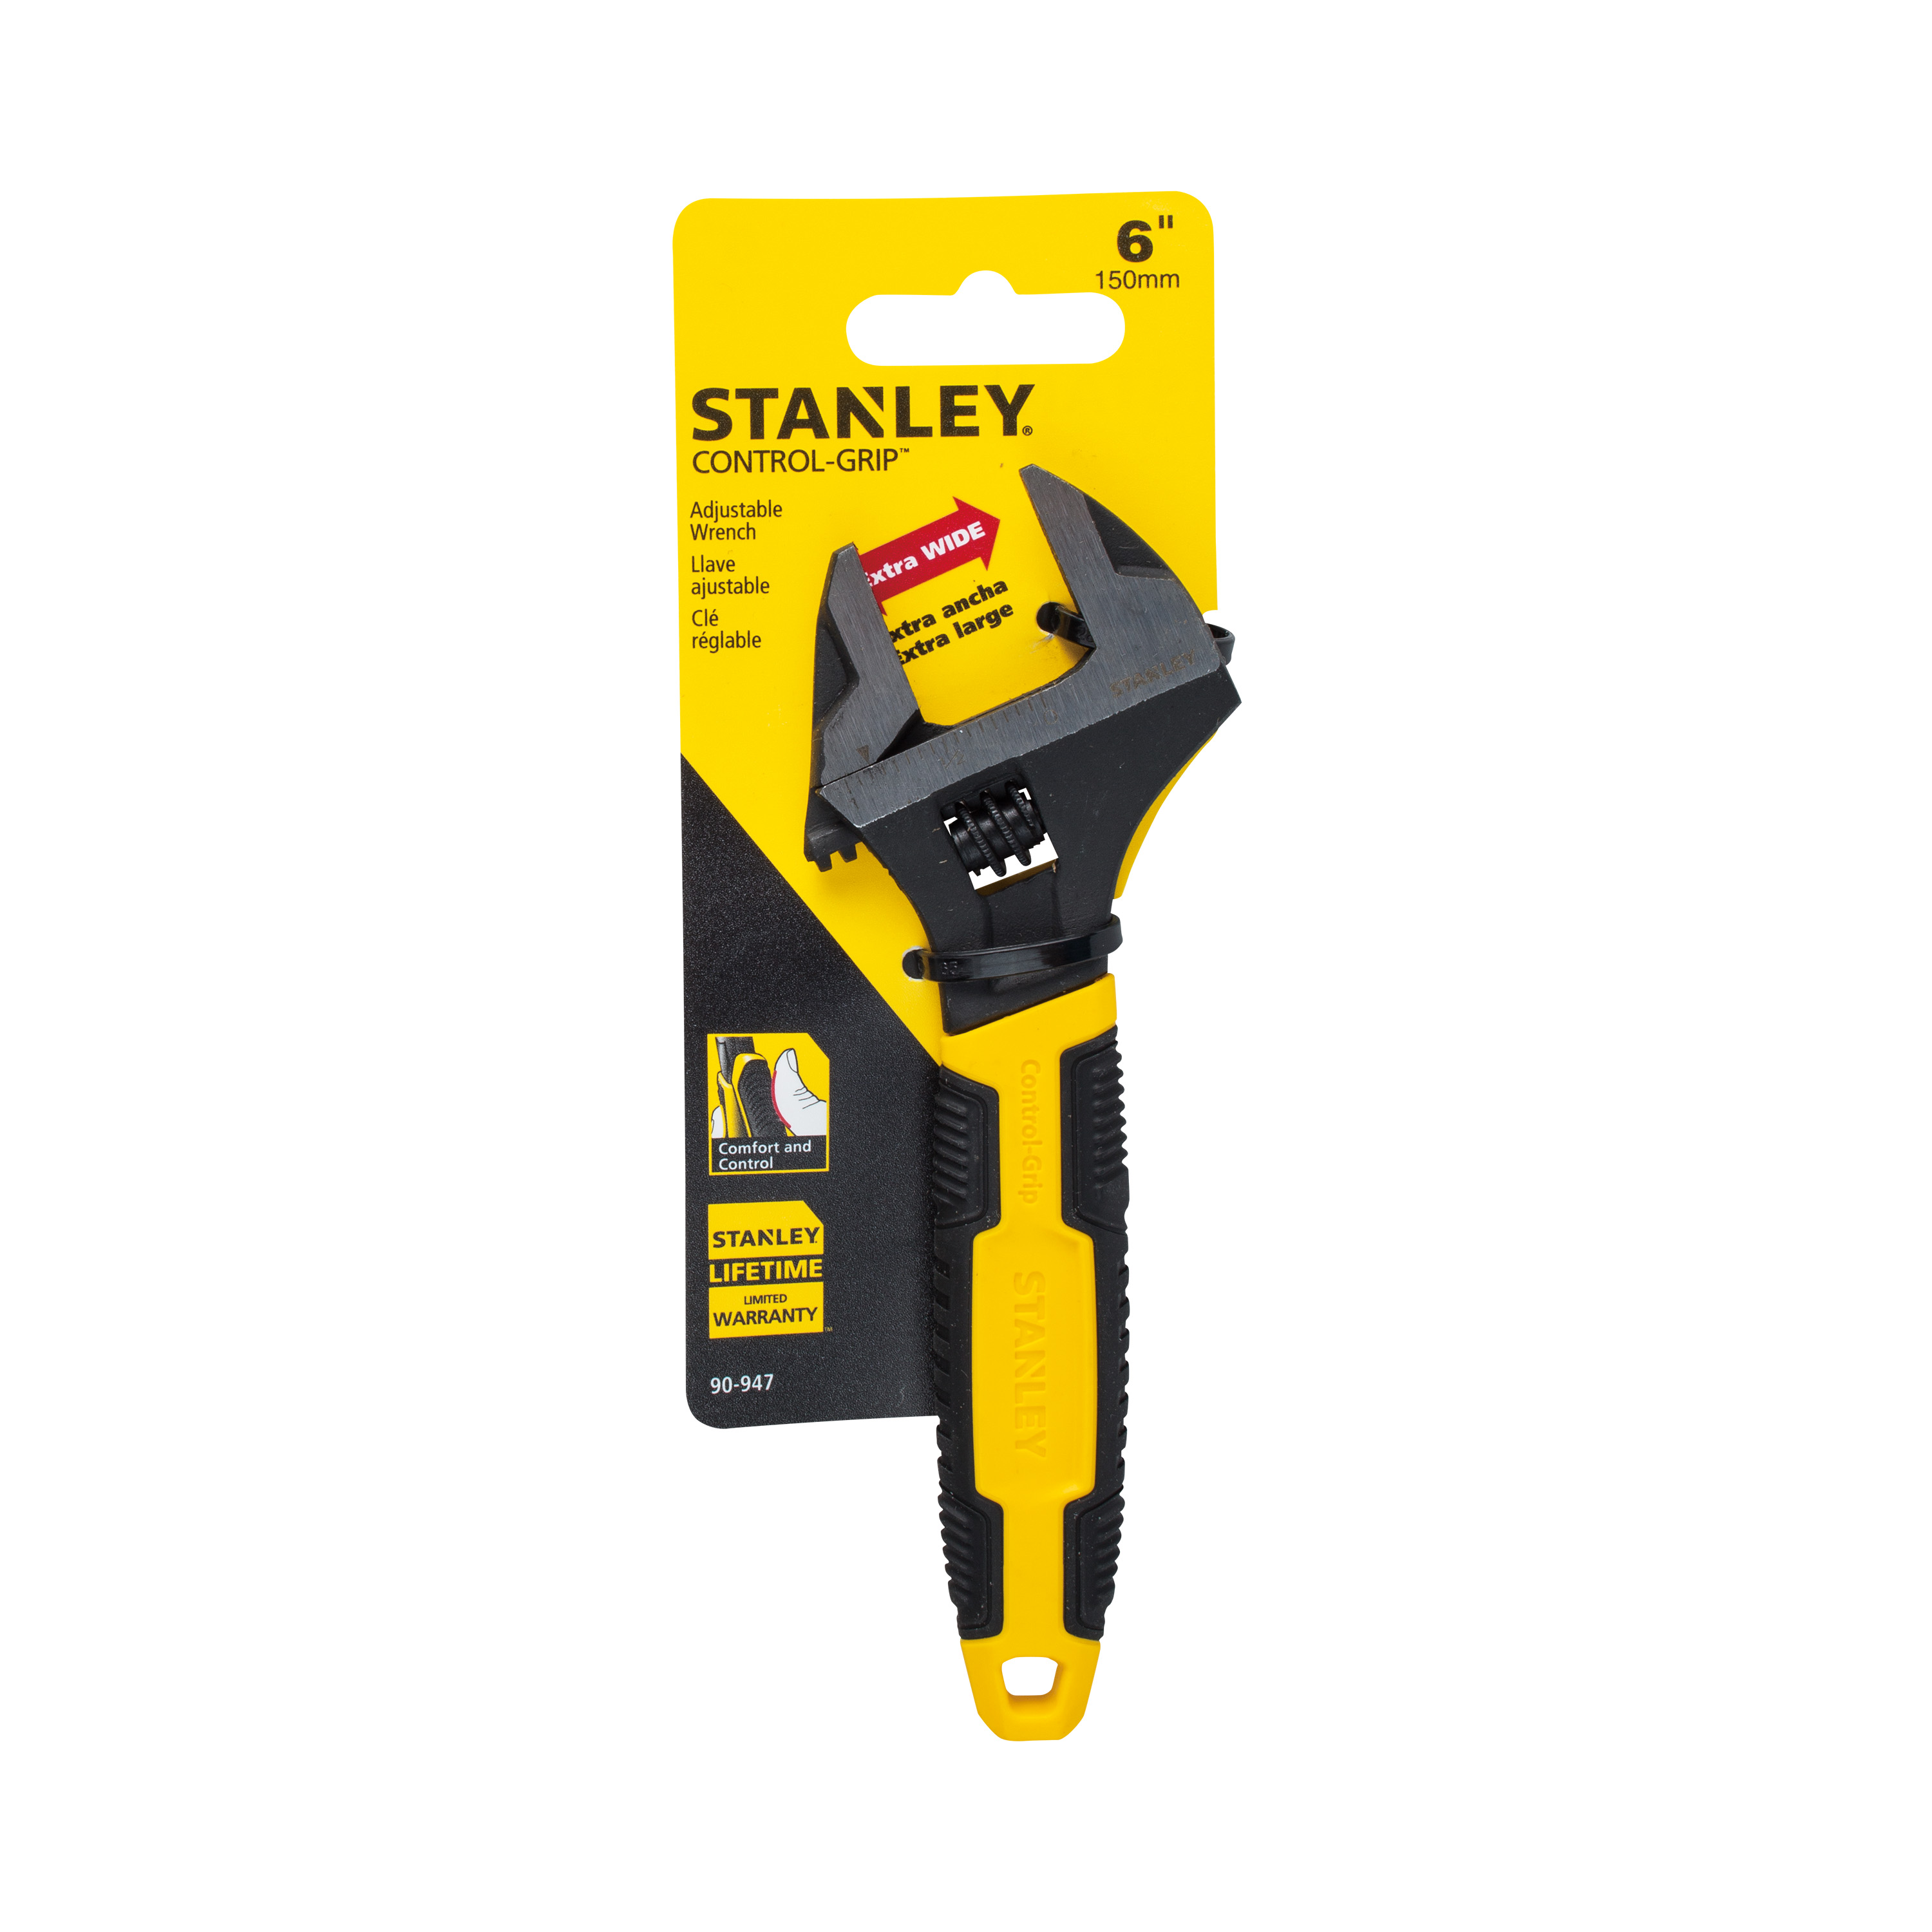 STANLEY® 90-947 - 6'' Adjustable Wrench, 90-947 - image 1 of 2